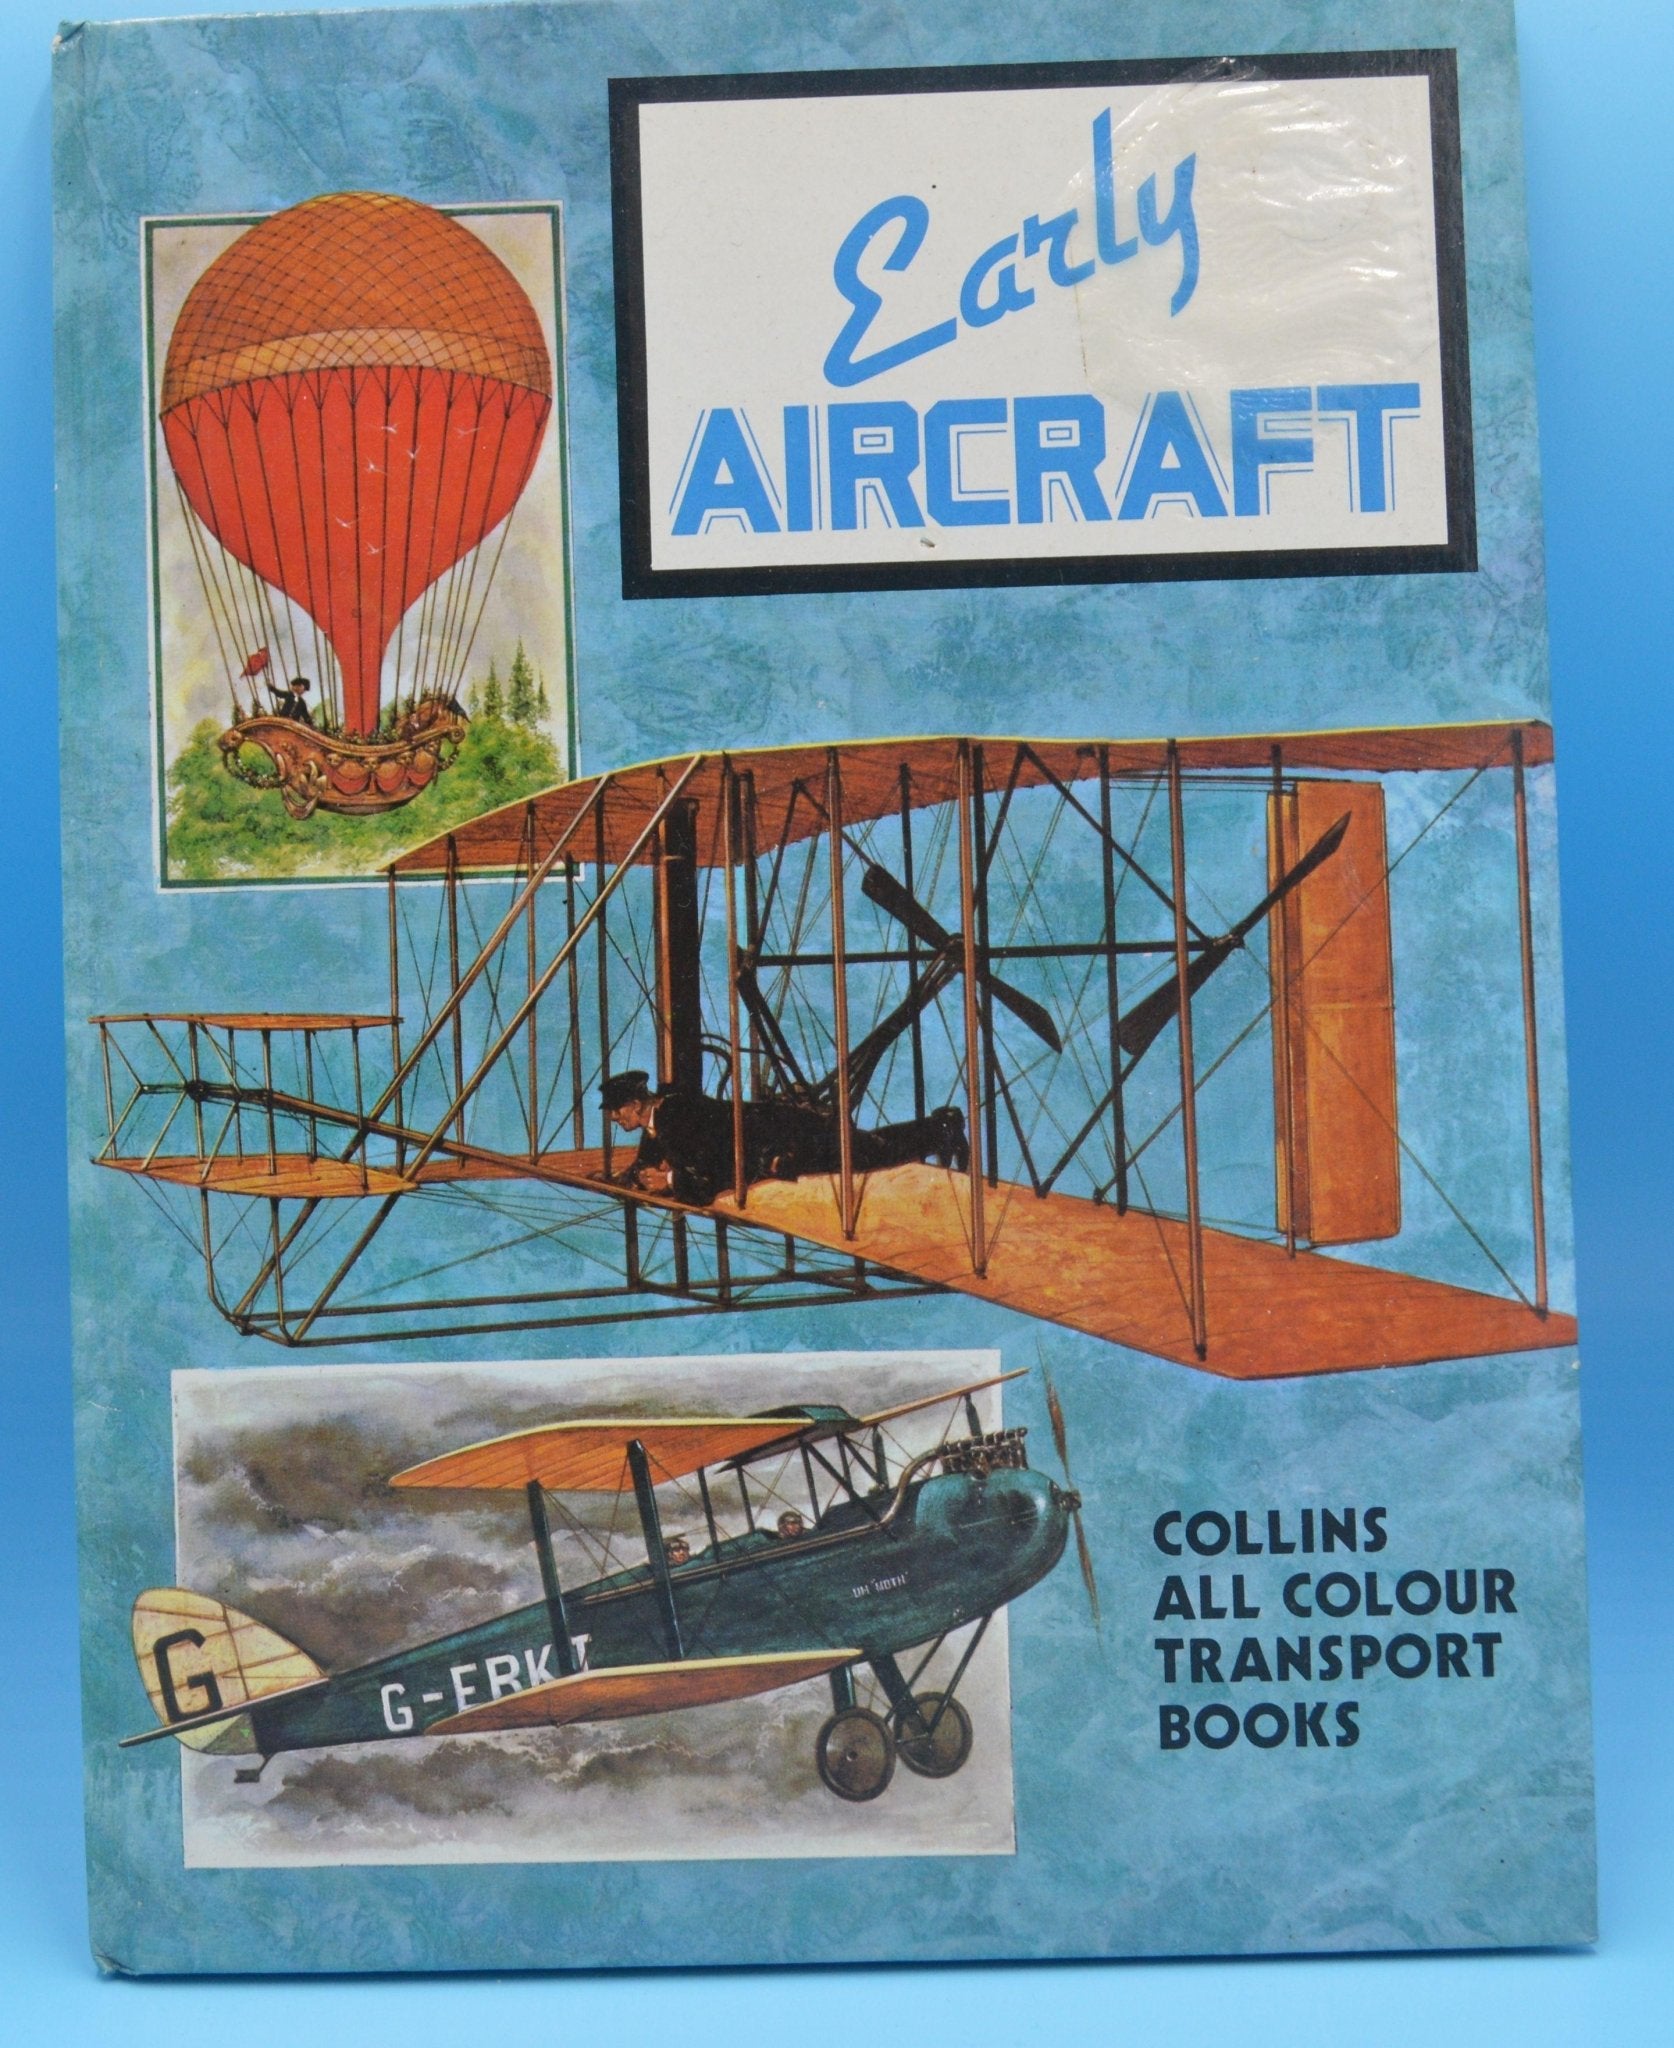 SECONDHAND BOOK EARLY AIRCRAFT by MAURICE ALLWARD & DAVID NASH - TMD167207